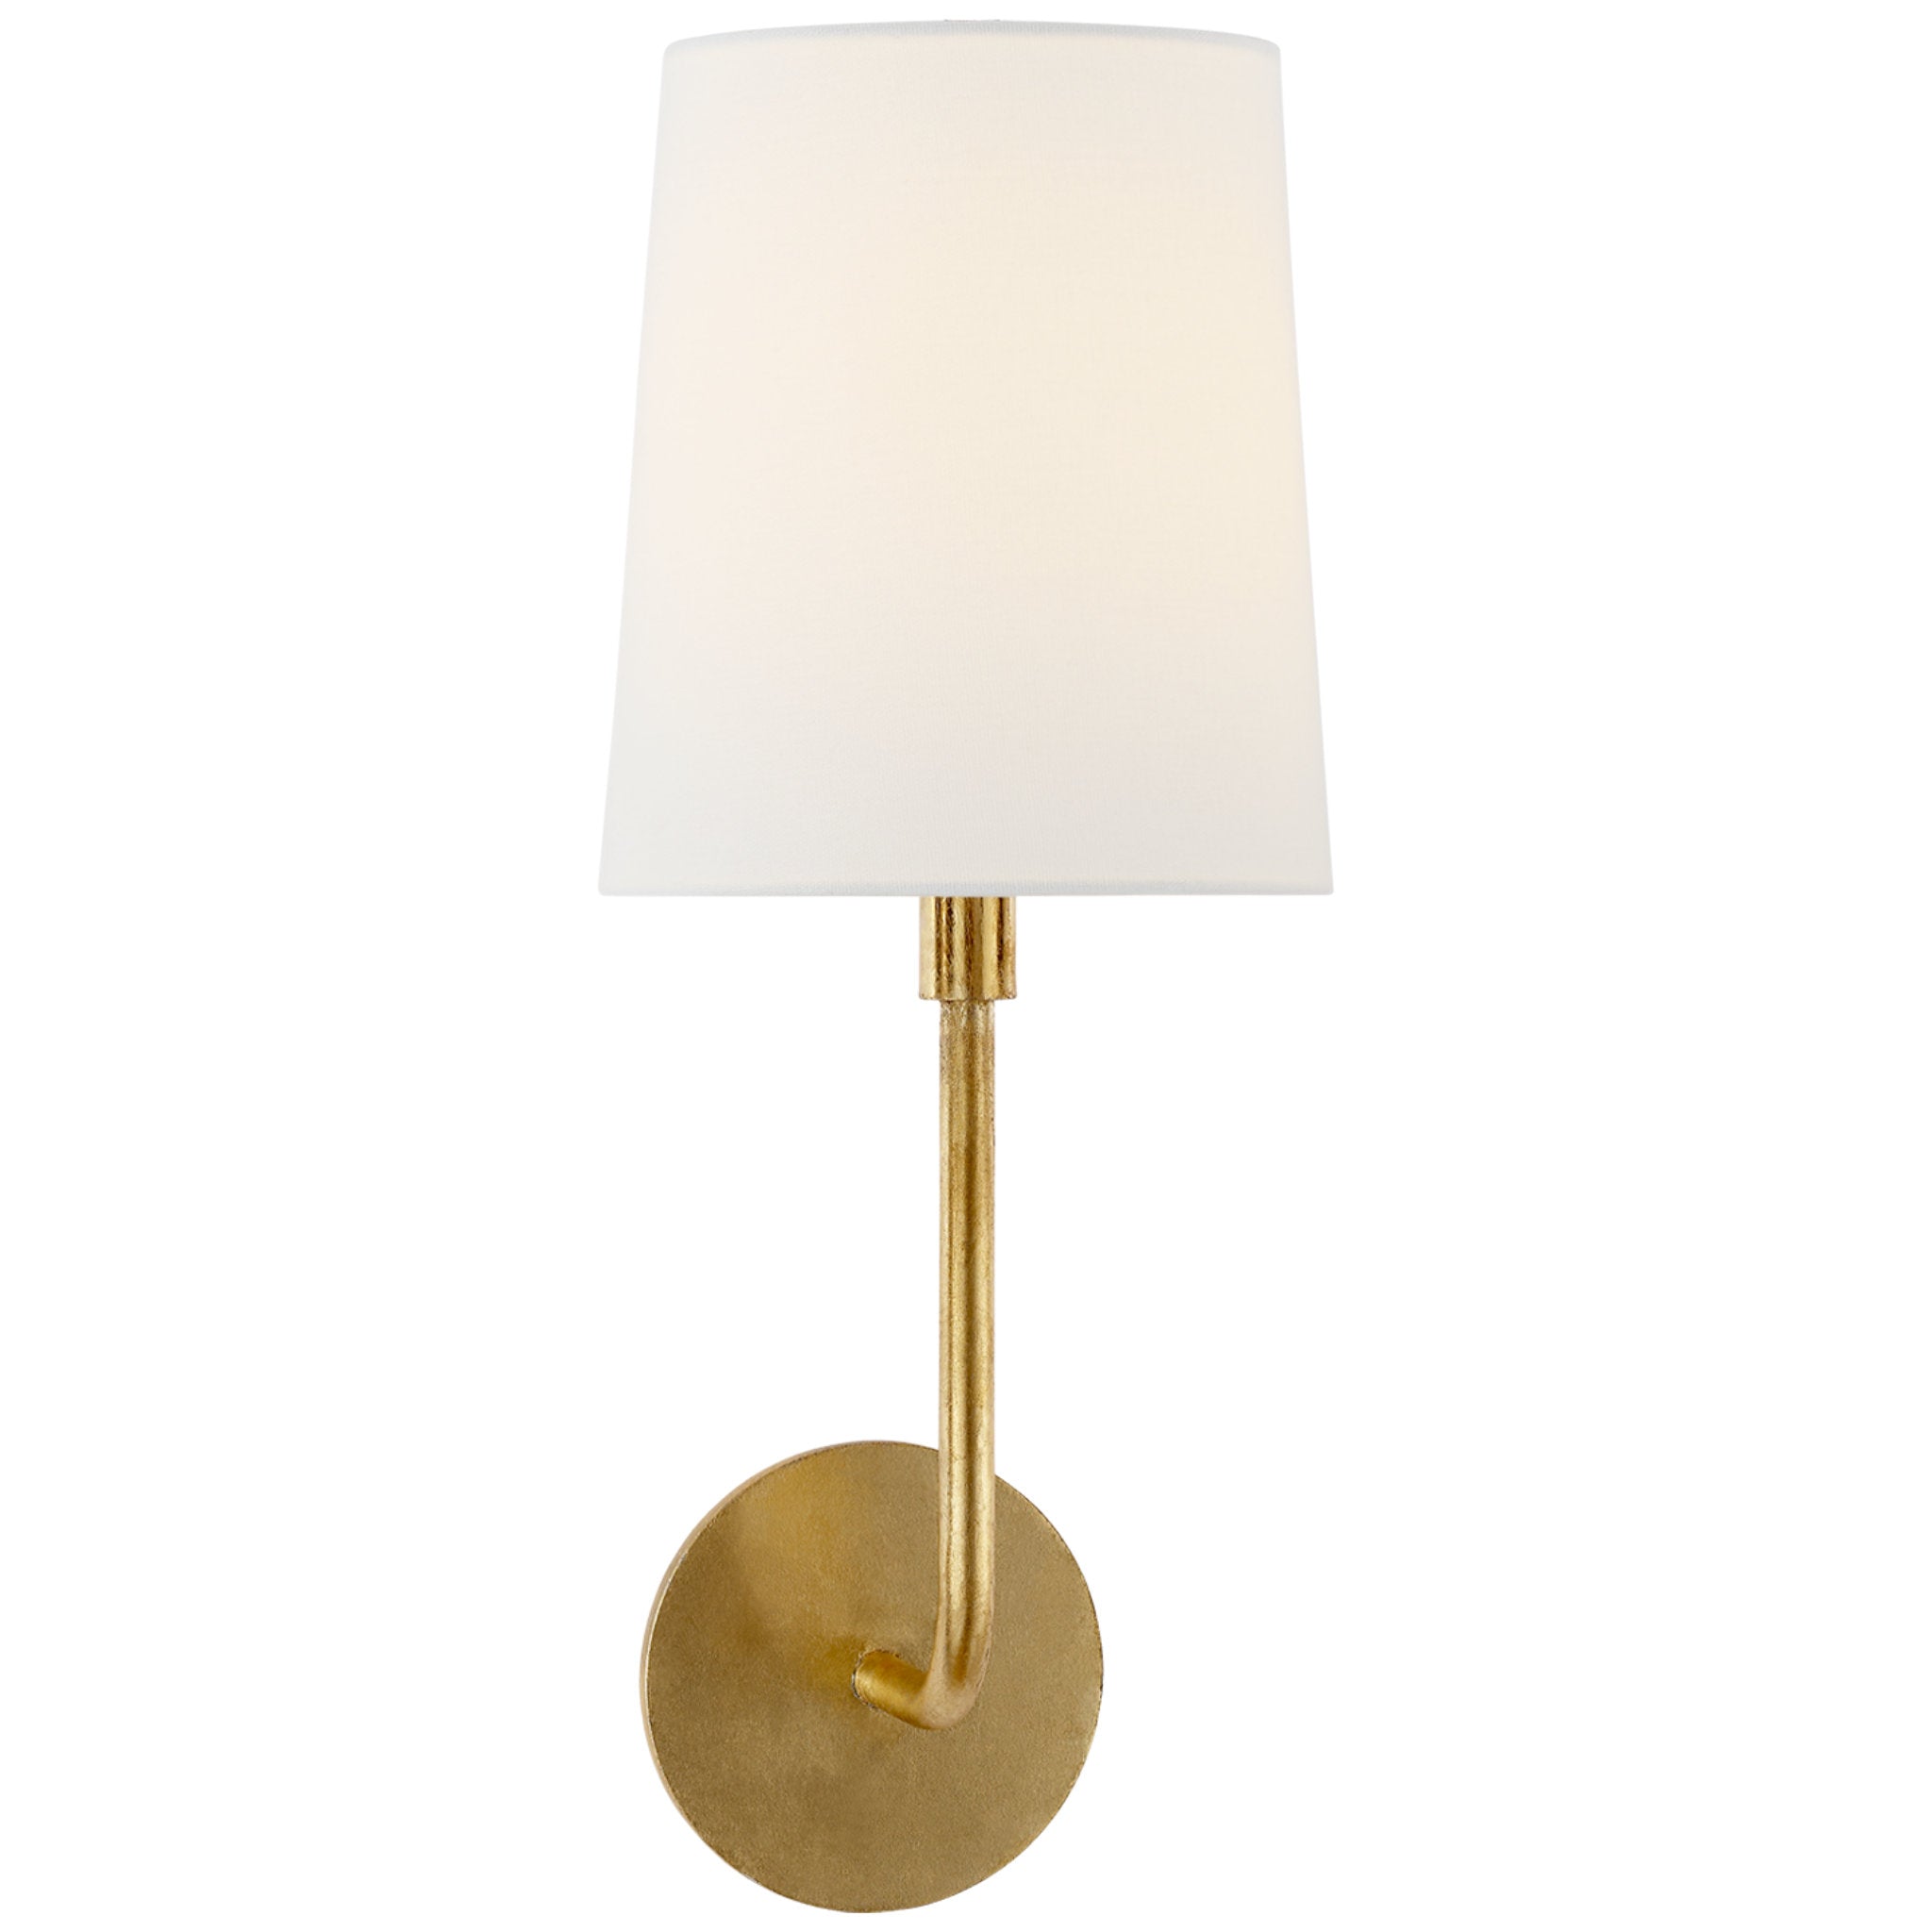 Barbara Barry Go Lightly Sconce in Gilded with Linen Shade